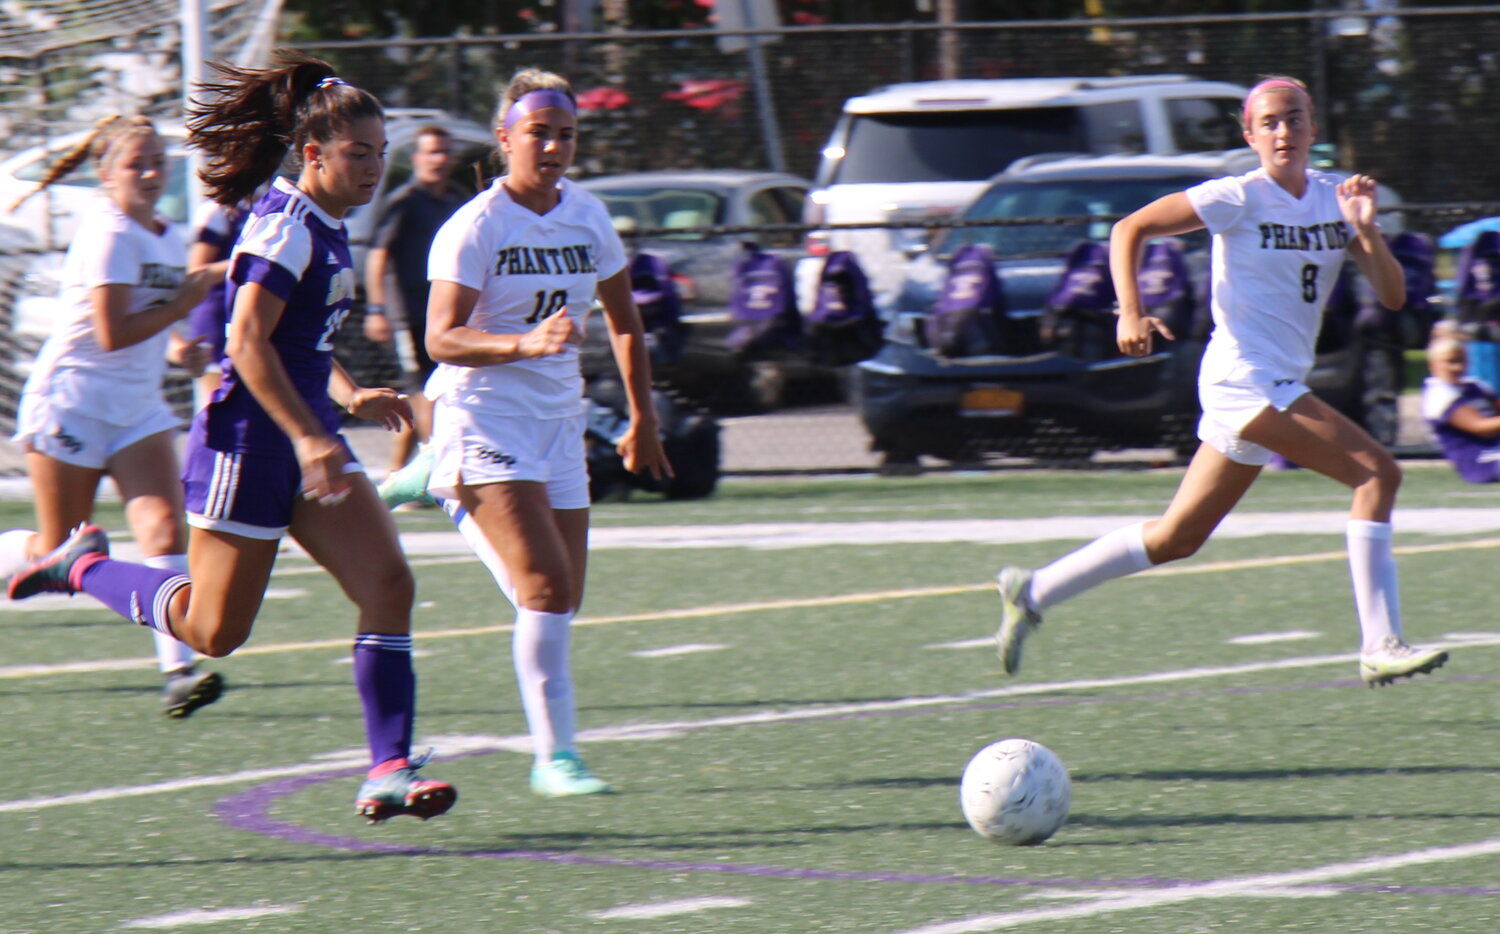 A hard-won penalty kick in the last 20 minutes of the second half resulted in the sole, and winning, goal of the Phantoms/Flashes girls varsity soccer game.